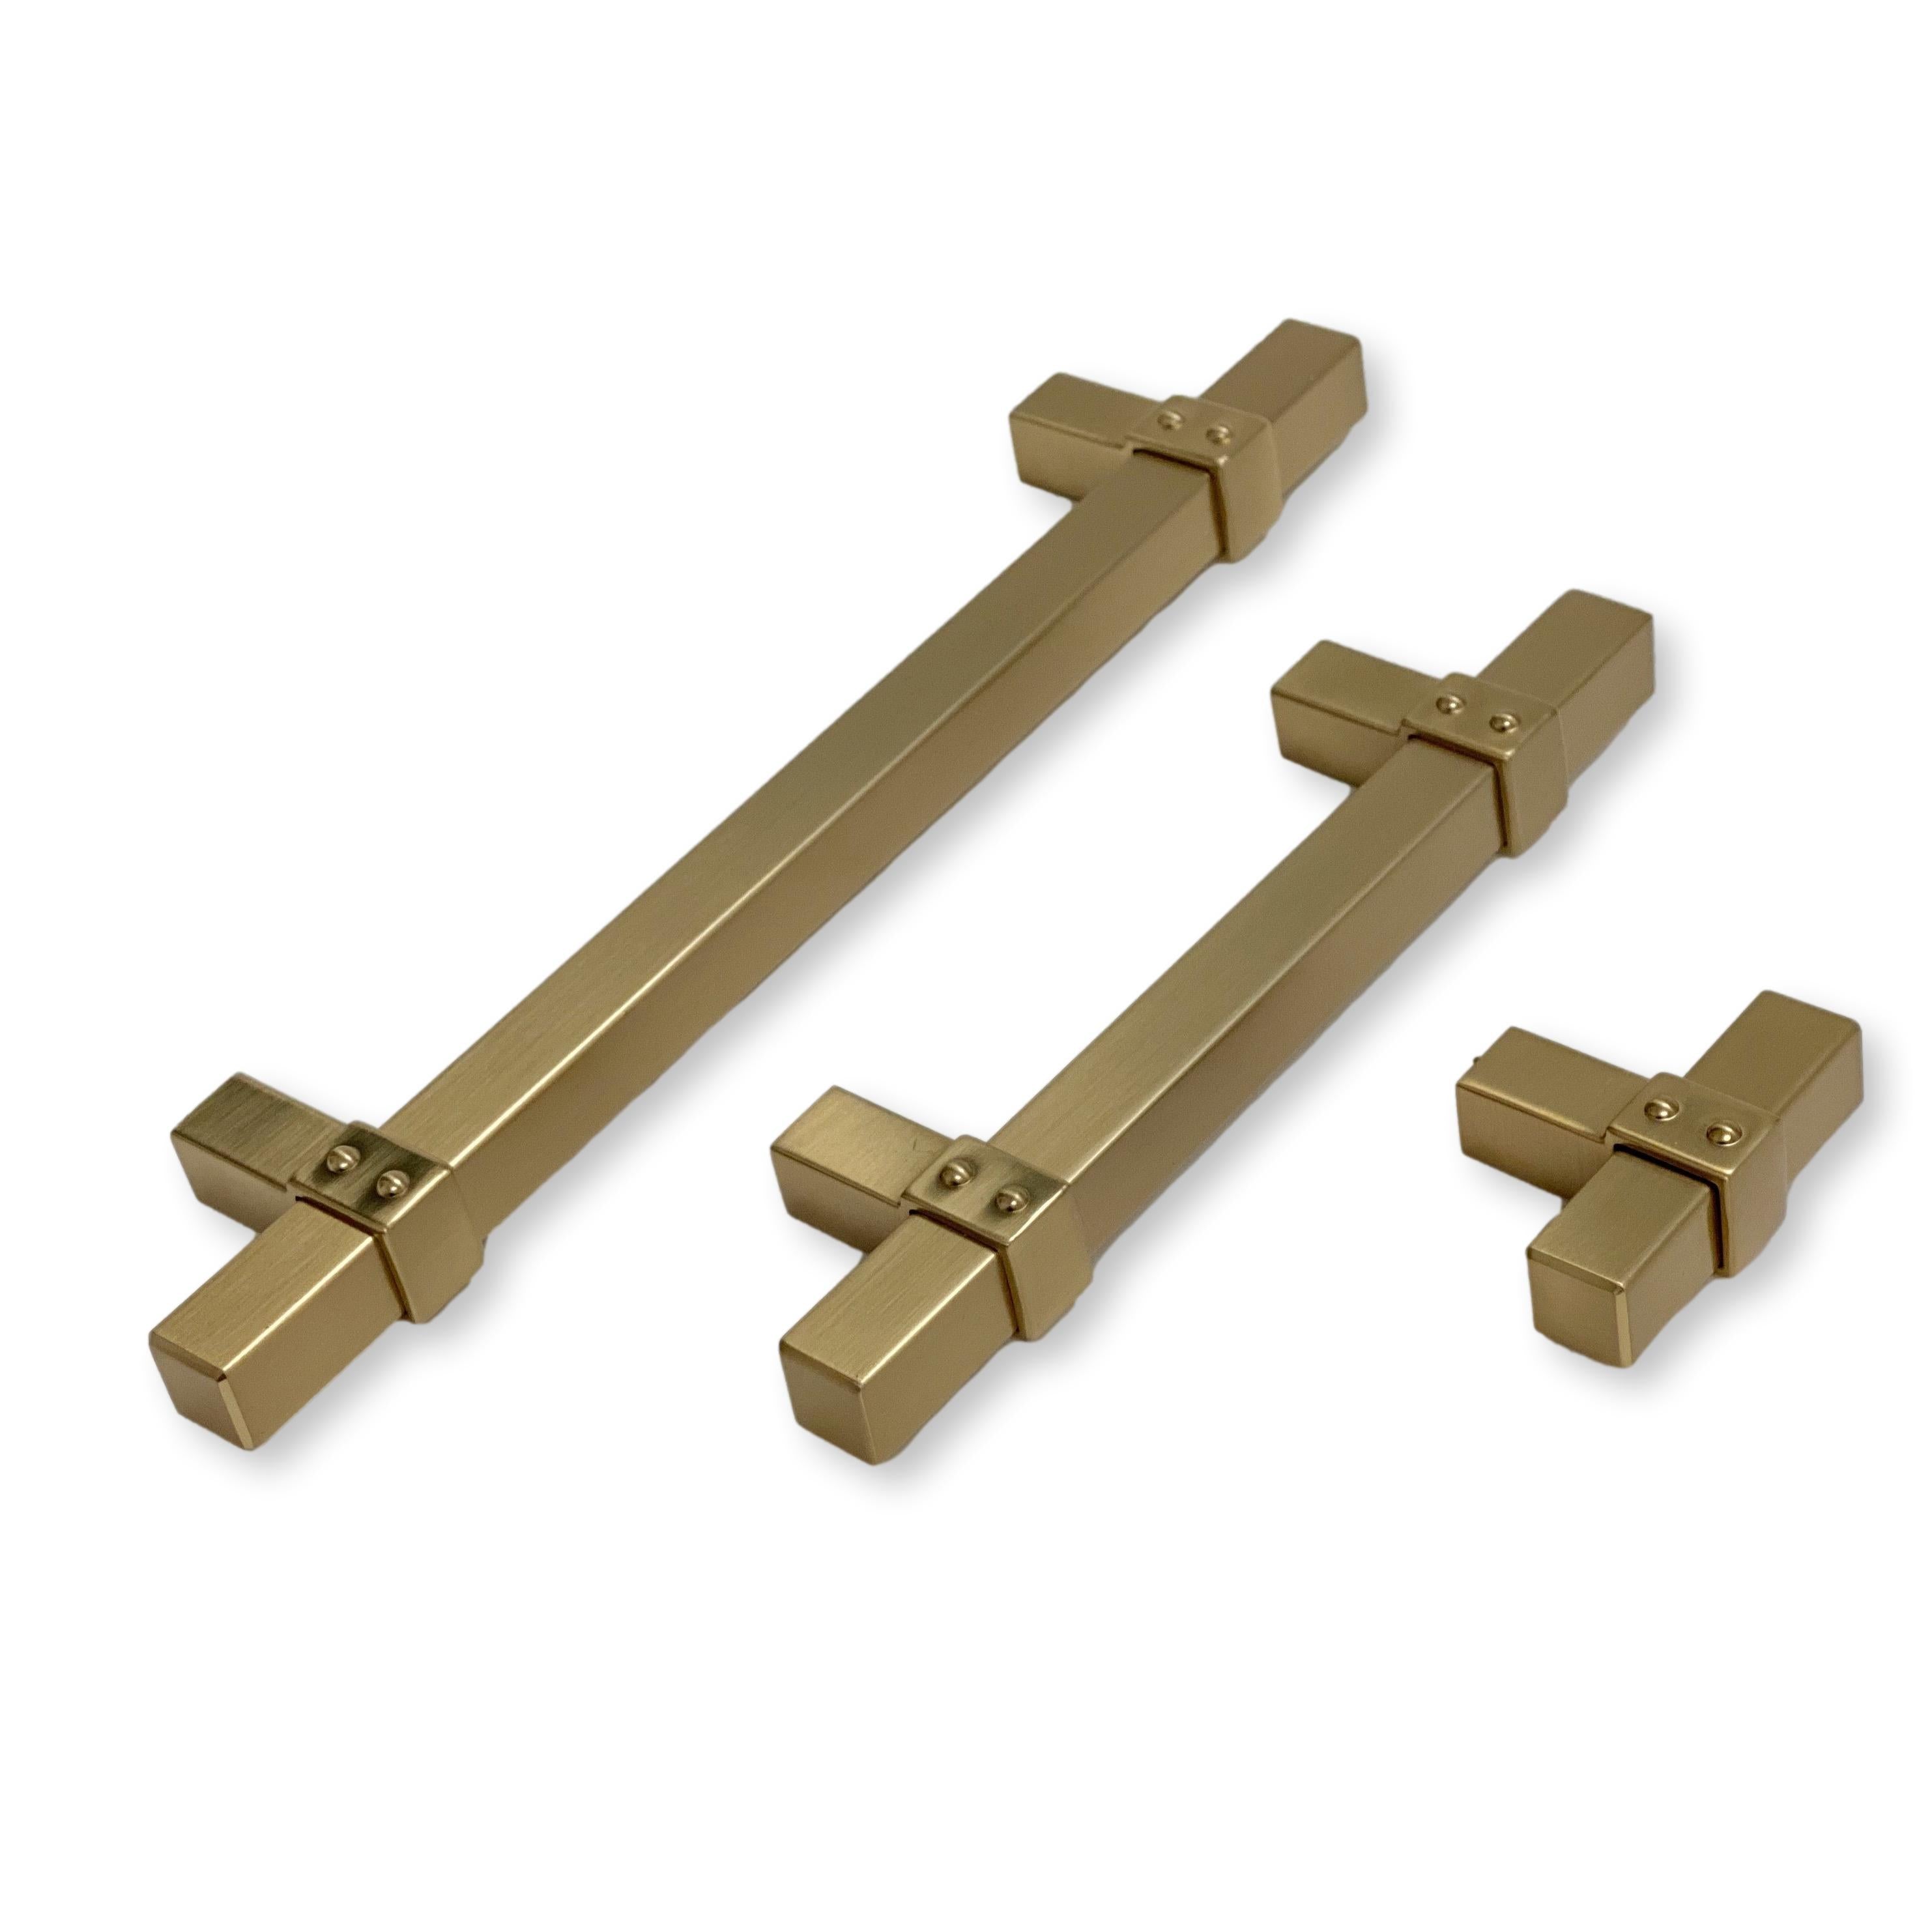 Cabinet Hardware Guide - The Knobs Company